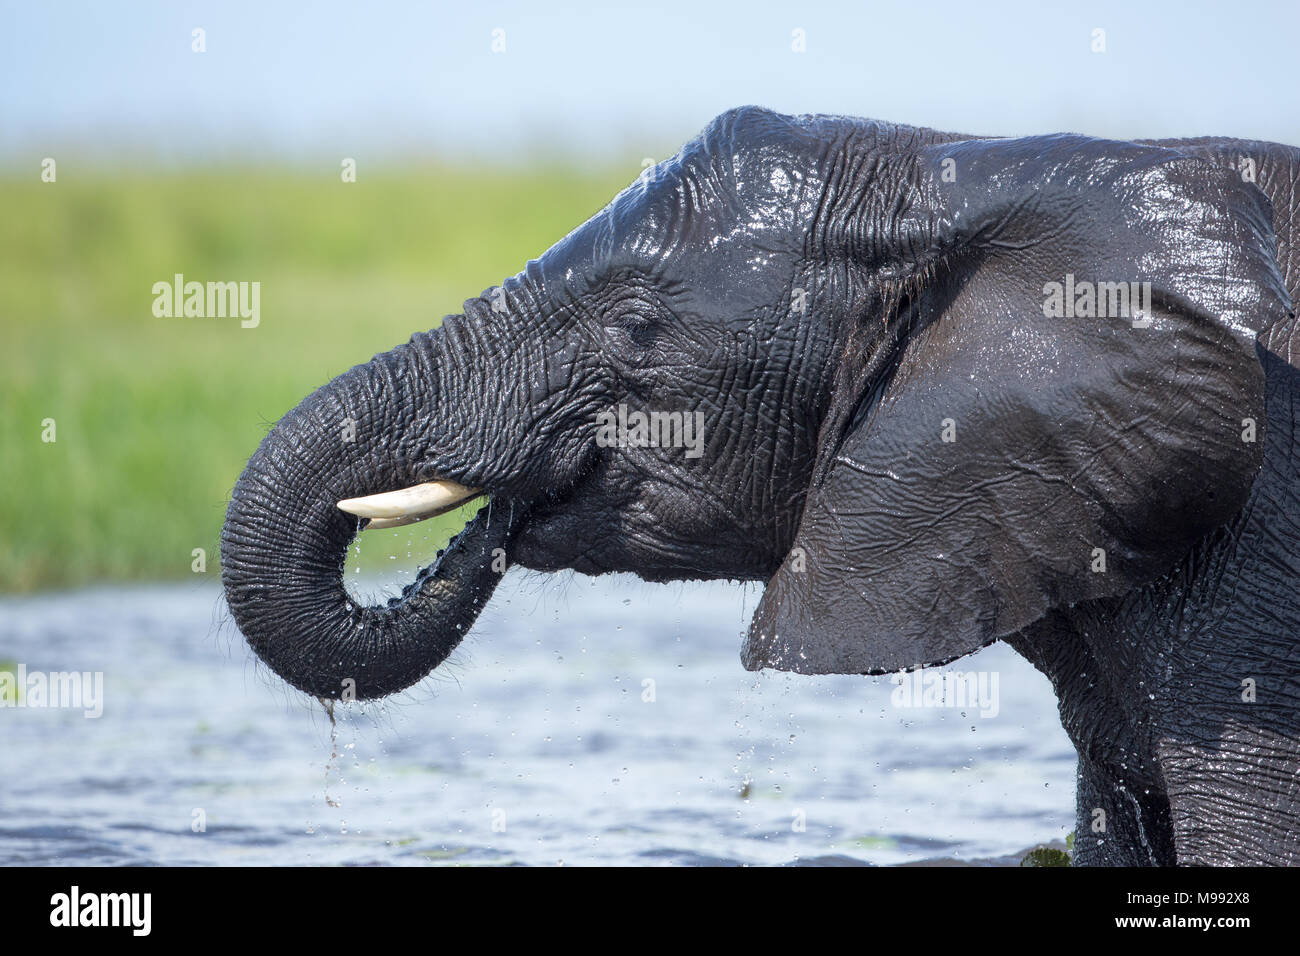 African Elephant (Loxodonta africana). Cooling off in river water. Using trunk lift drinking water to mouth. Ear flapping. Thermoregulation. Wet skin. Stock Photo